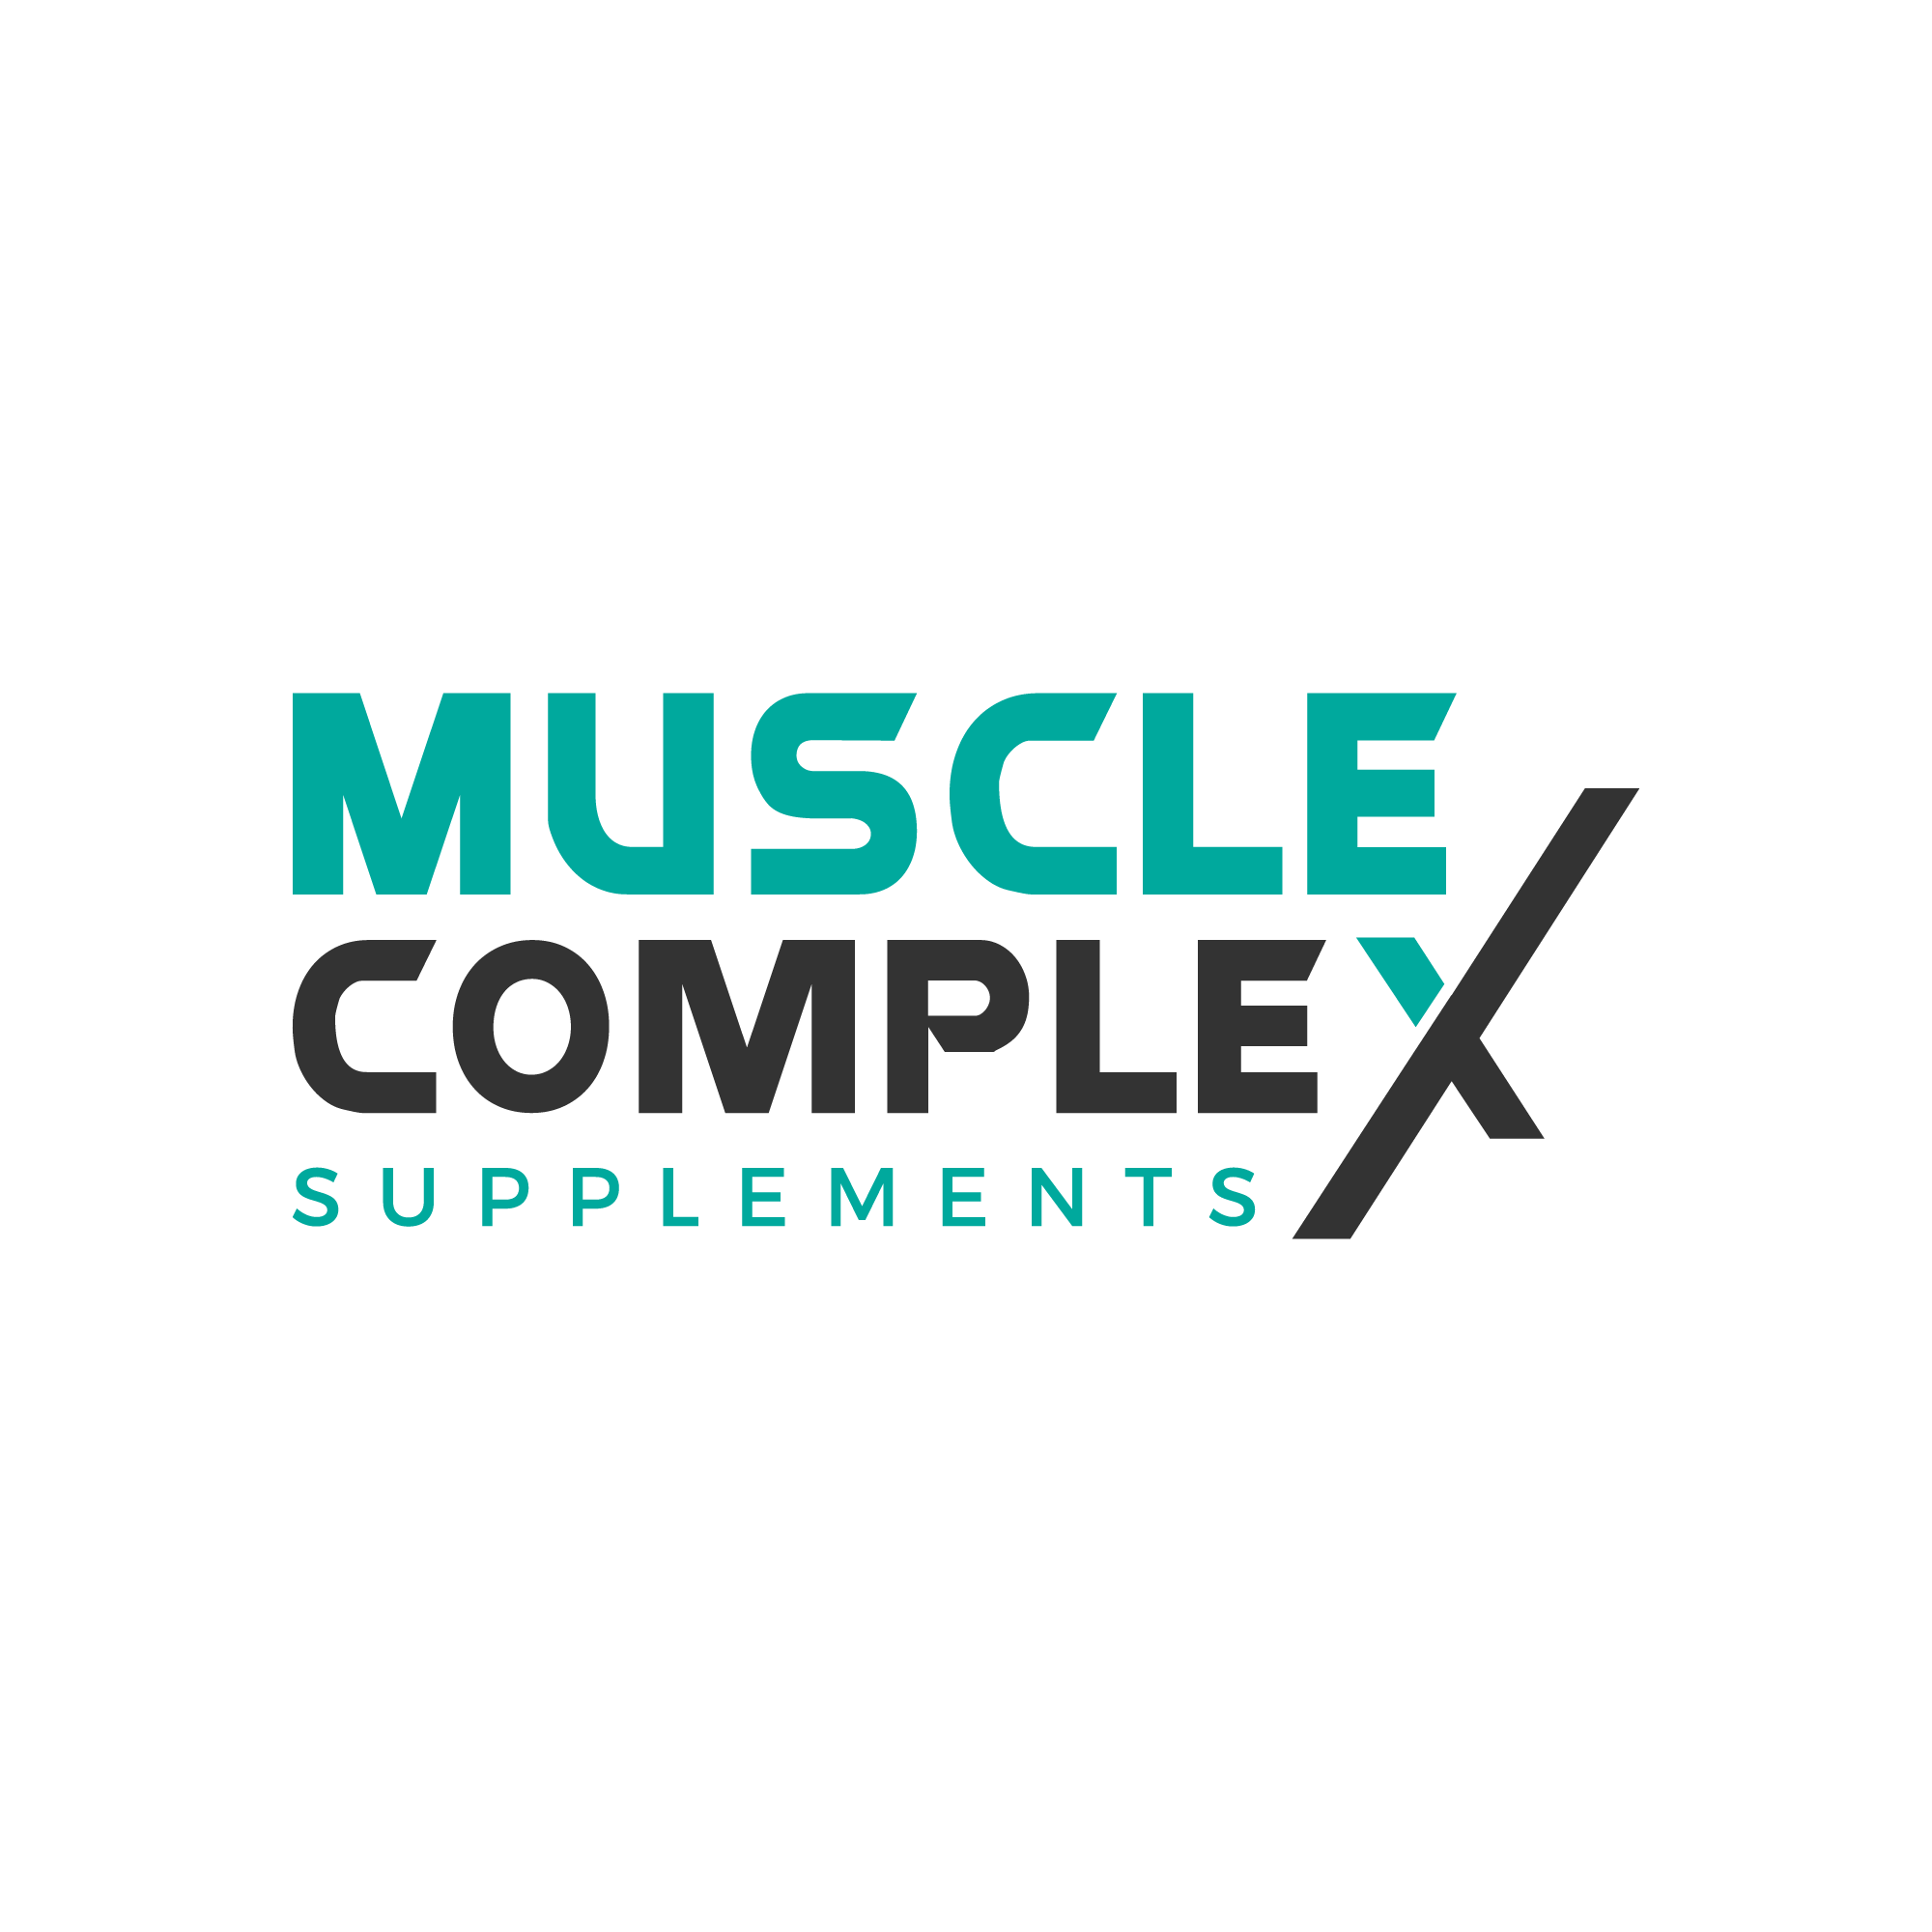 Muscle Complex